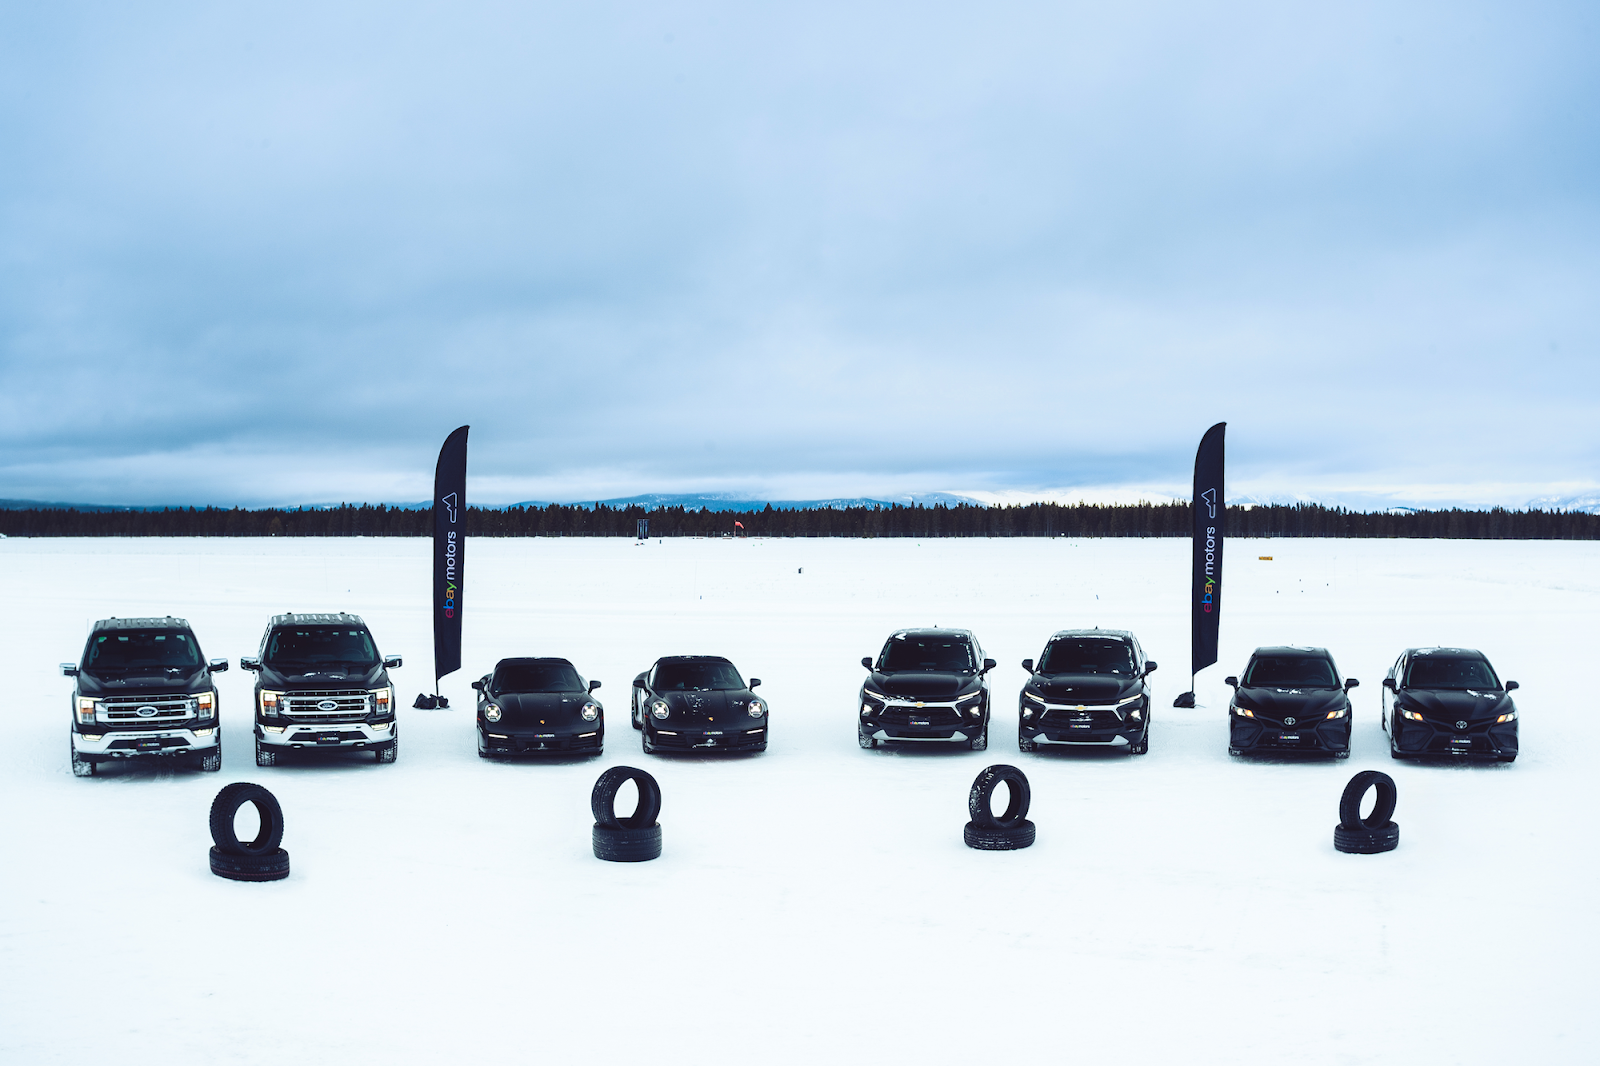 Cars and trucks on a frozen lake